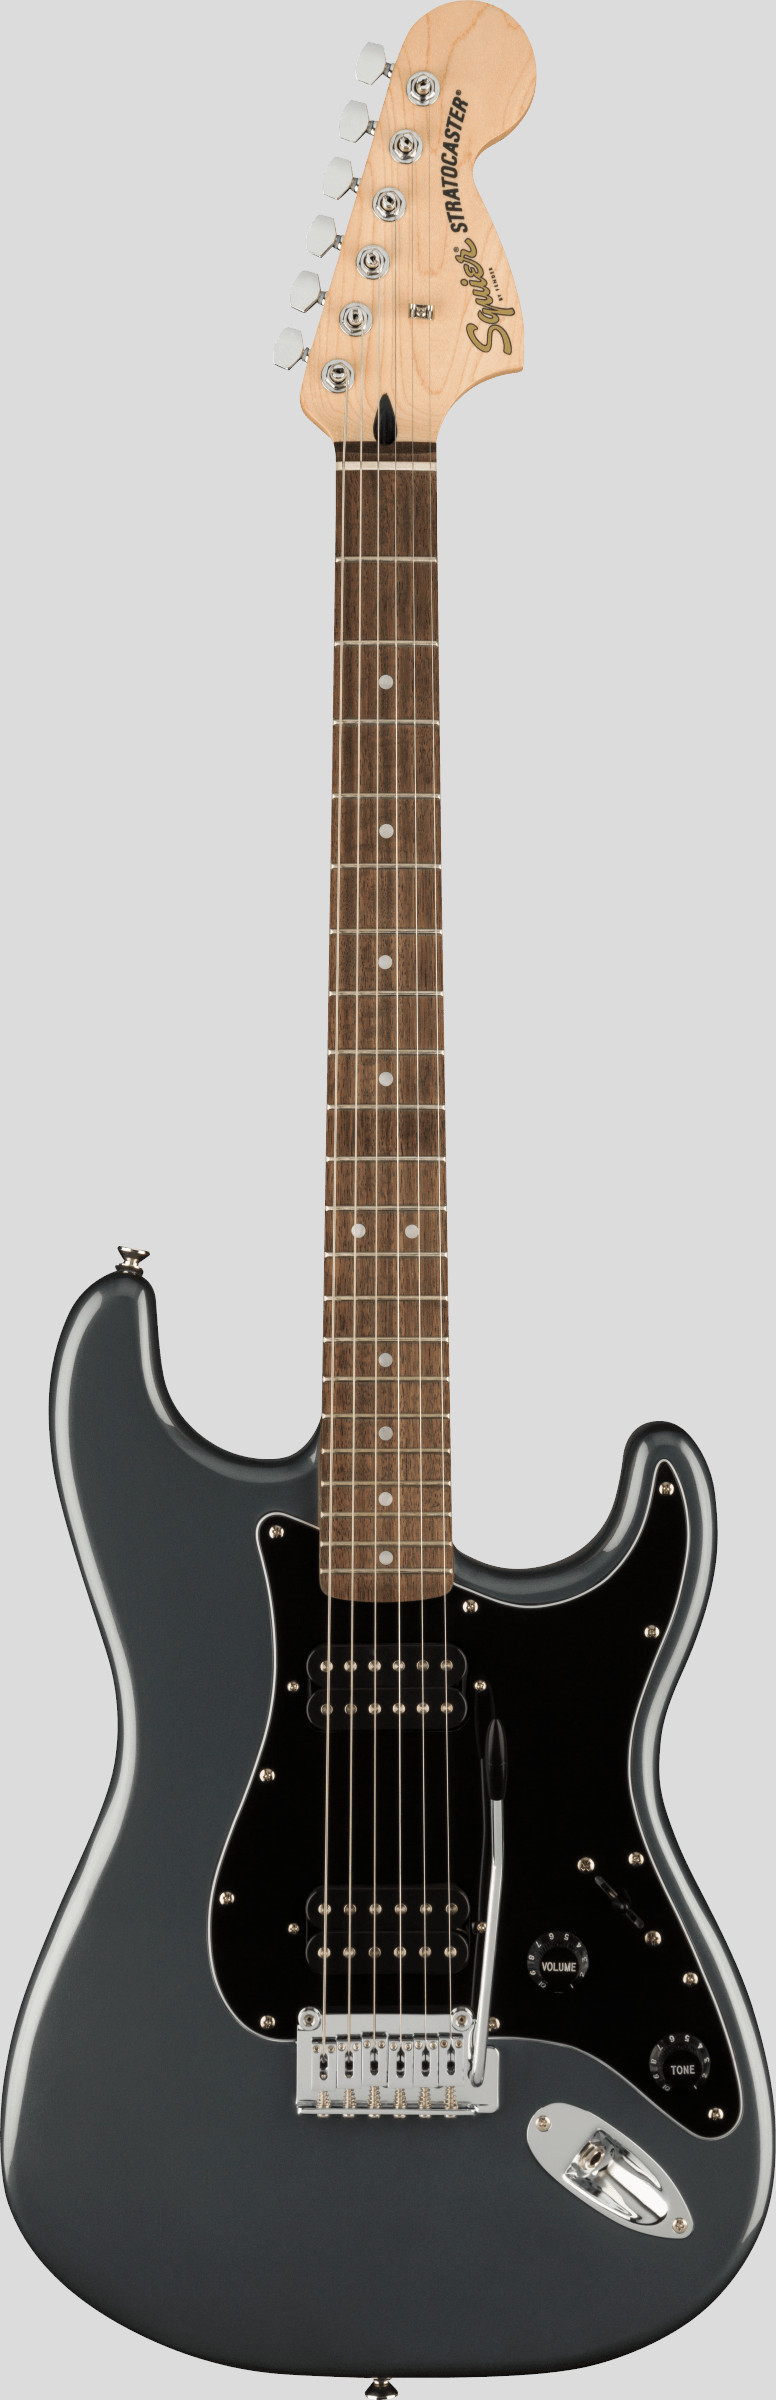 Squier by Fender Affinity Stratocaster HH Charcoal Frost Metallic 1